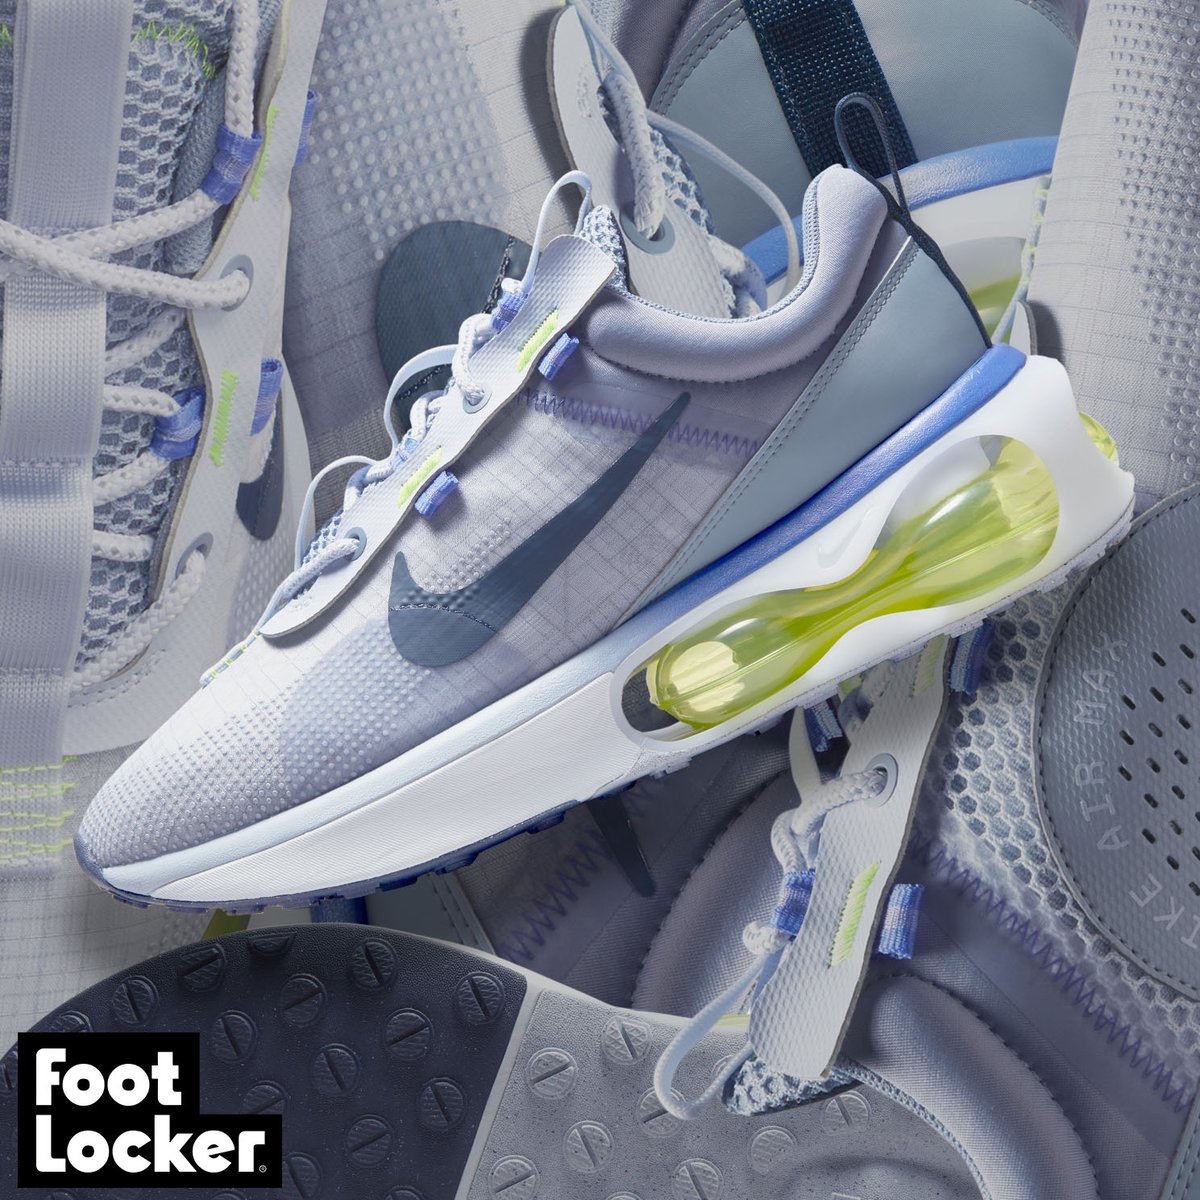 Integreren Koopje opwinding Foot Locker on Twitter: "A new generation of Air ☁️ #Nike Air Max 2021 is  now available online and in select stores. Shop: https://t.co/0lMuEJ7n5w  https://t.co/QbtLNNv8lT" / X